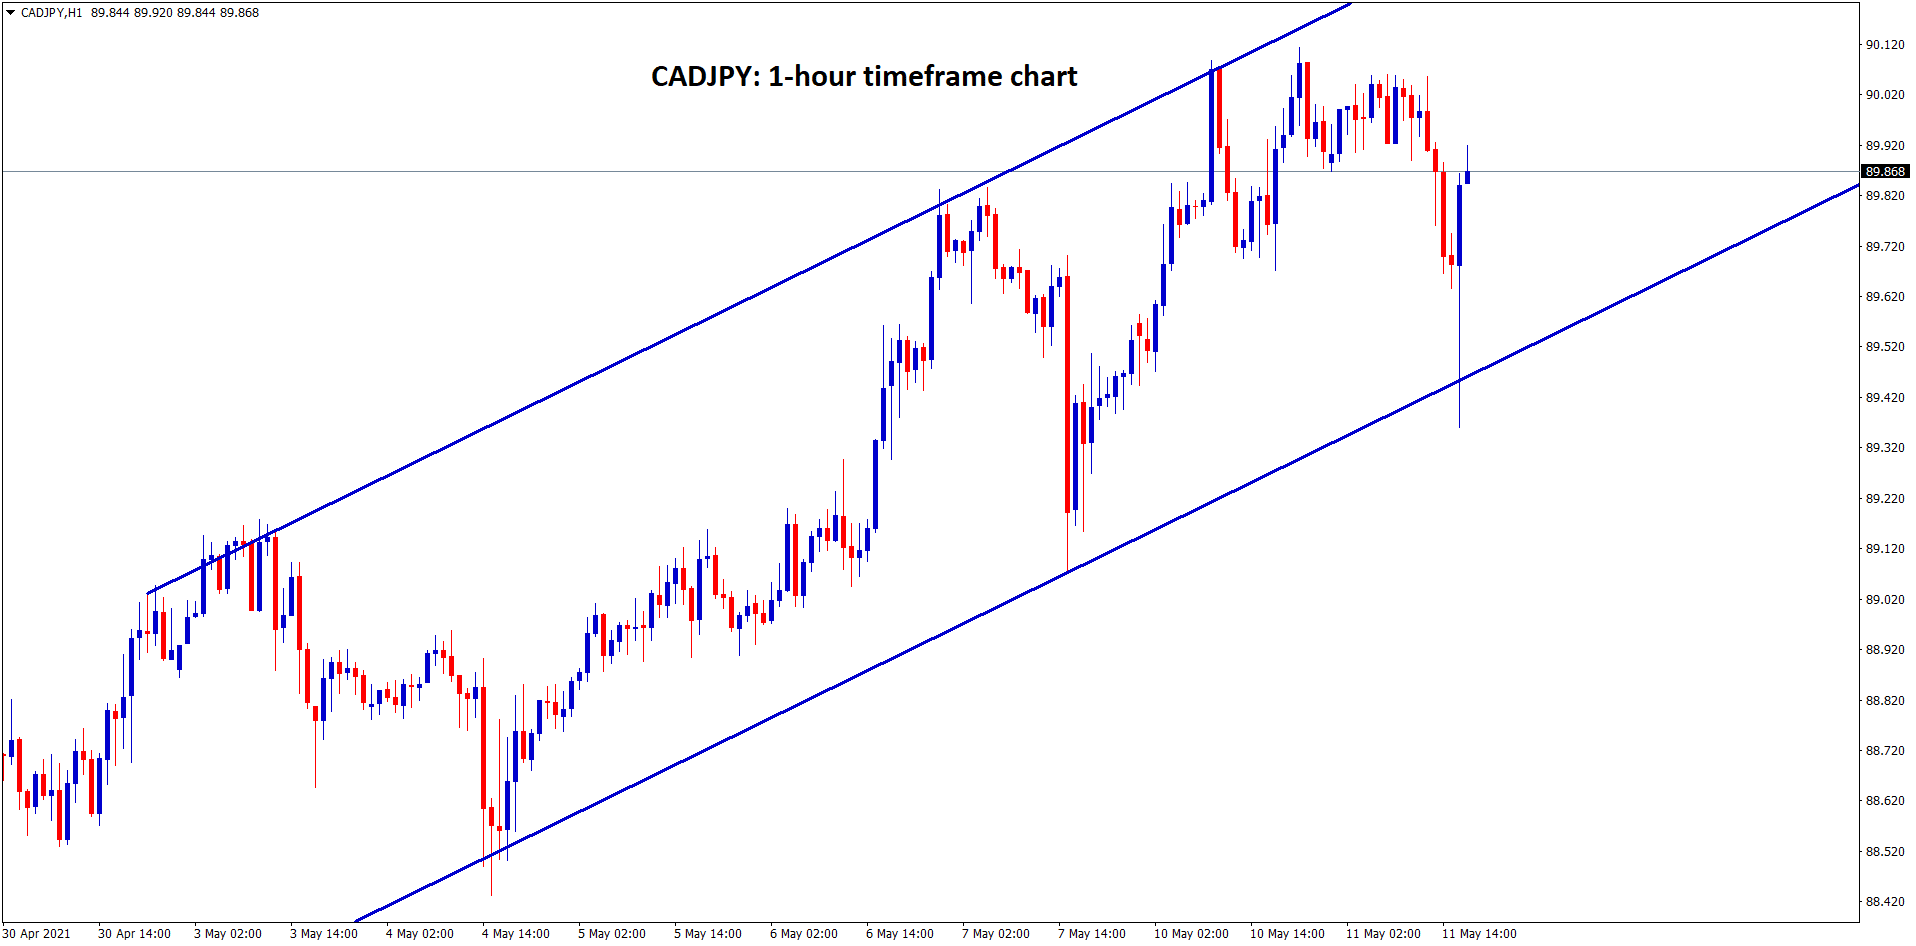 CADJPY moving in an ascending channel forming higher highs and higher lows